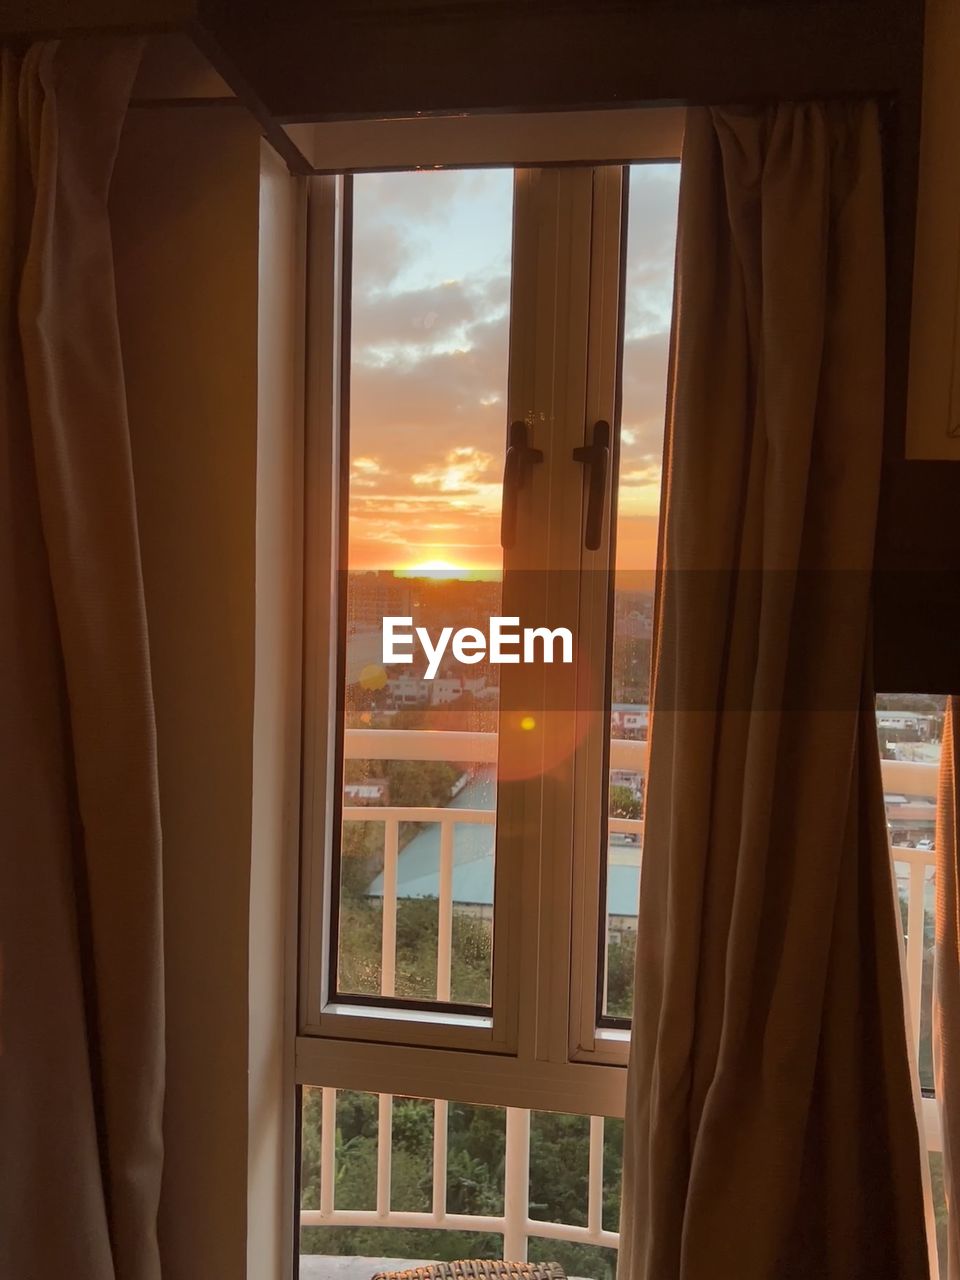 window, interior design, curtain, room, architecture, indoors, window covering, sky, sunset, nature, glass, home interior, built structure, building, window treatment, no people, home, house, wood, transparent, looking through window, residential district, day, city, sunlight, looking, travel, cloud, door